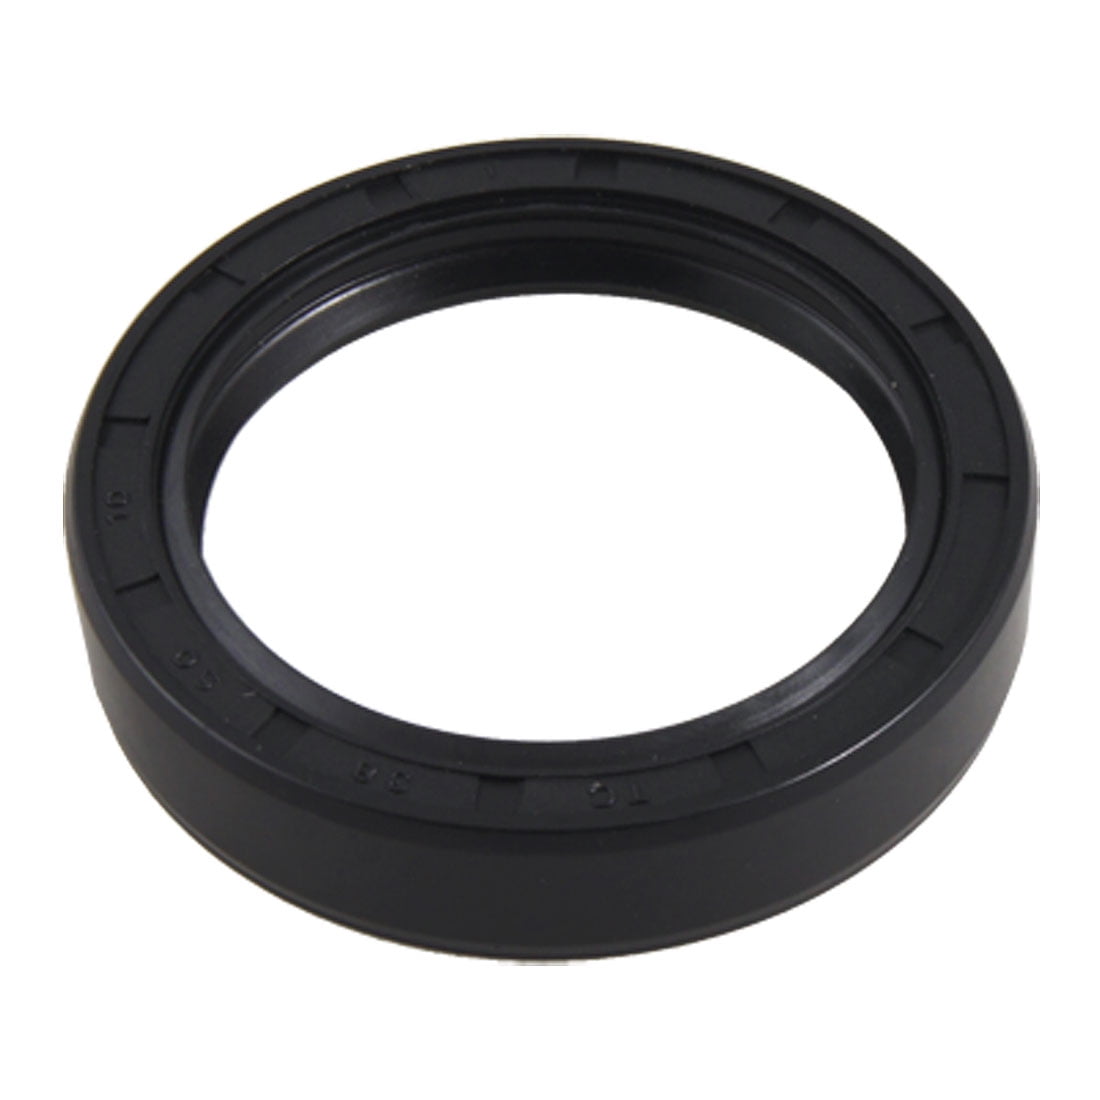 Metric Oil Shaft Seal 25 x 40 x 10mm Double Lip   Price for 1 pc 